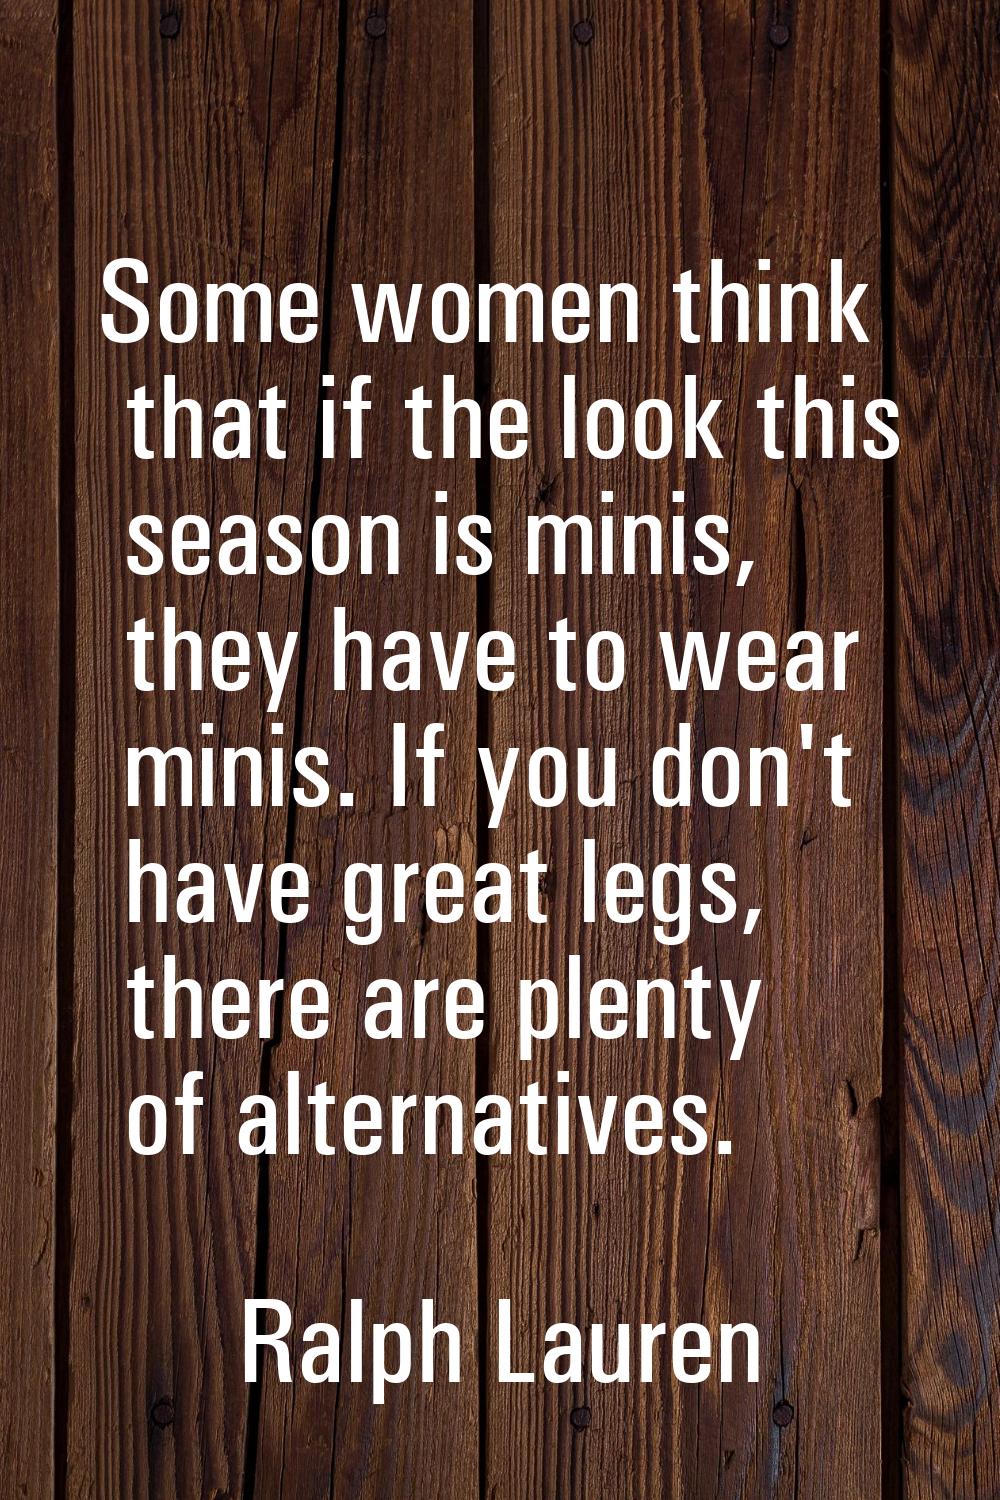 Some women think that if the look this season is minis, they have to wear minis. If you don't have 